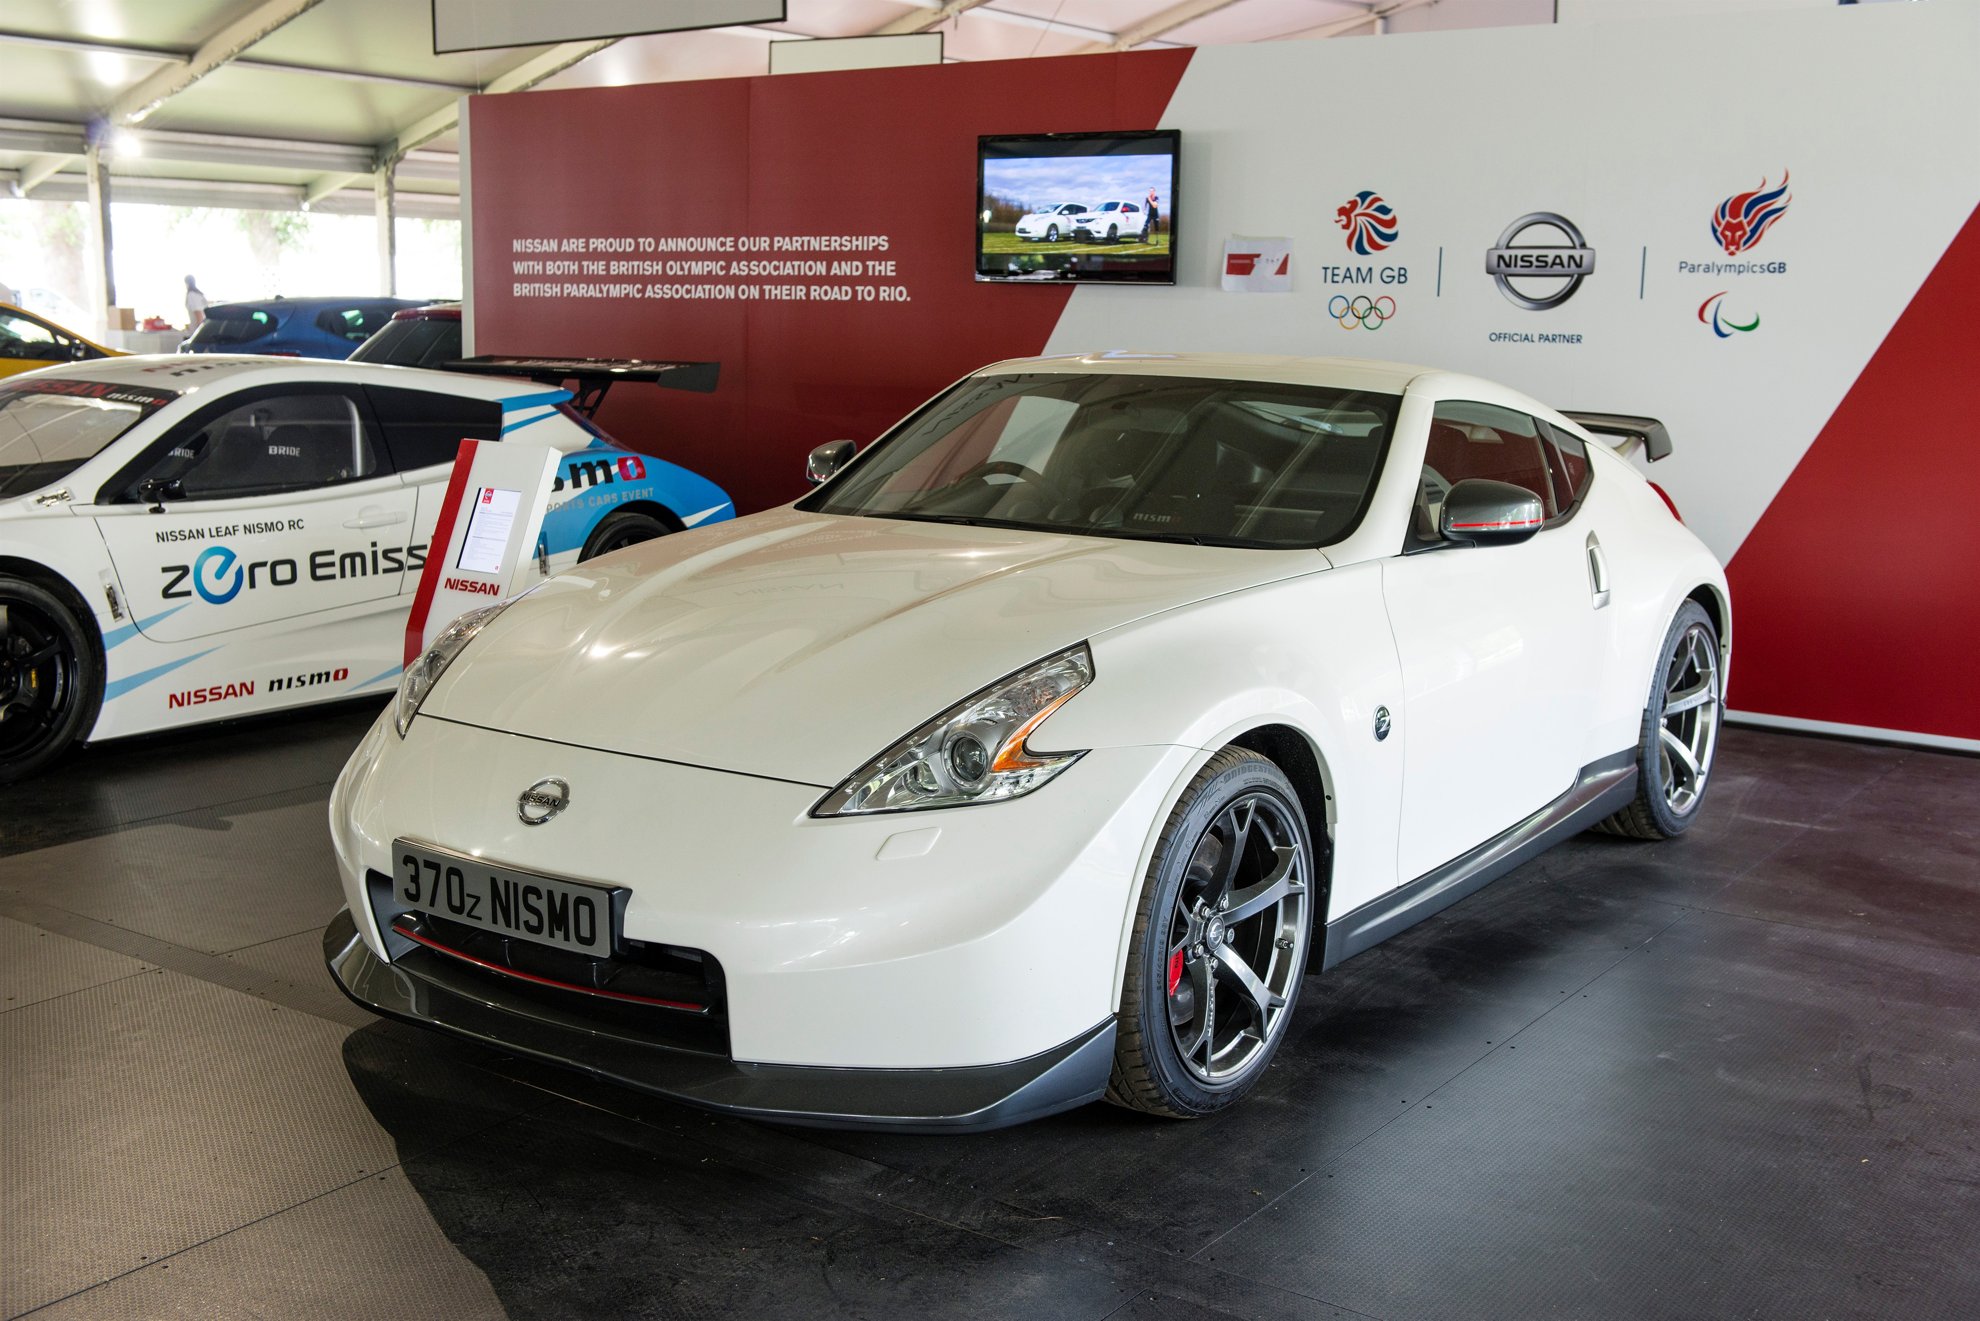 NISSAN SHOWSTOPPERS SET TO STAR AT GOODWOOD FESTIVAL OF SPEED